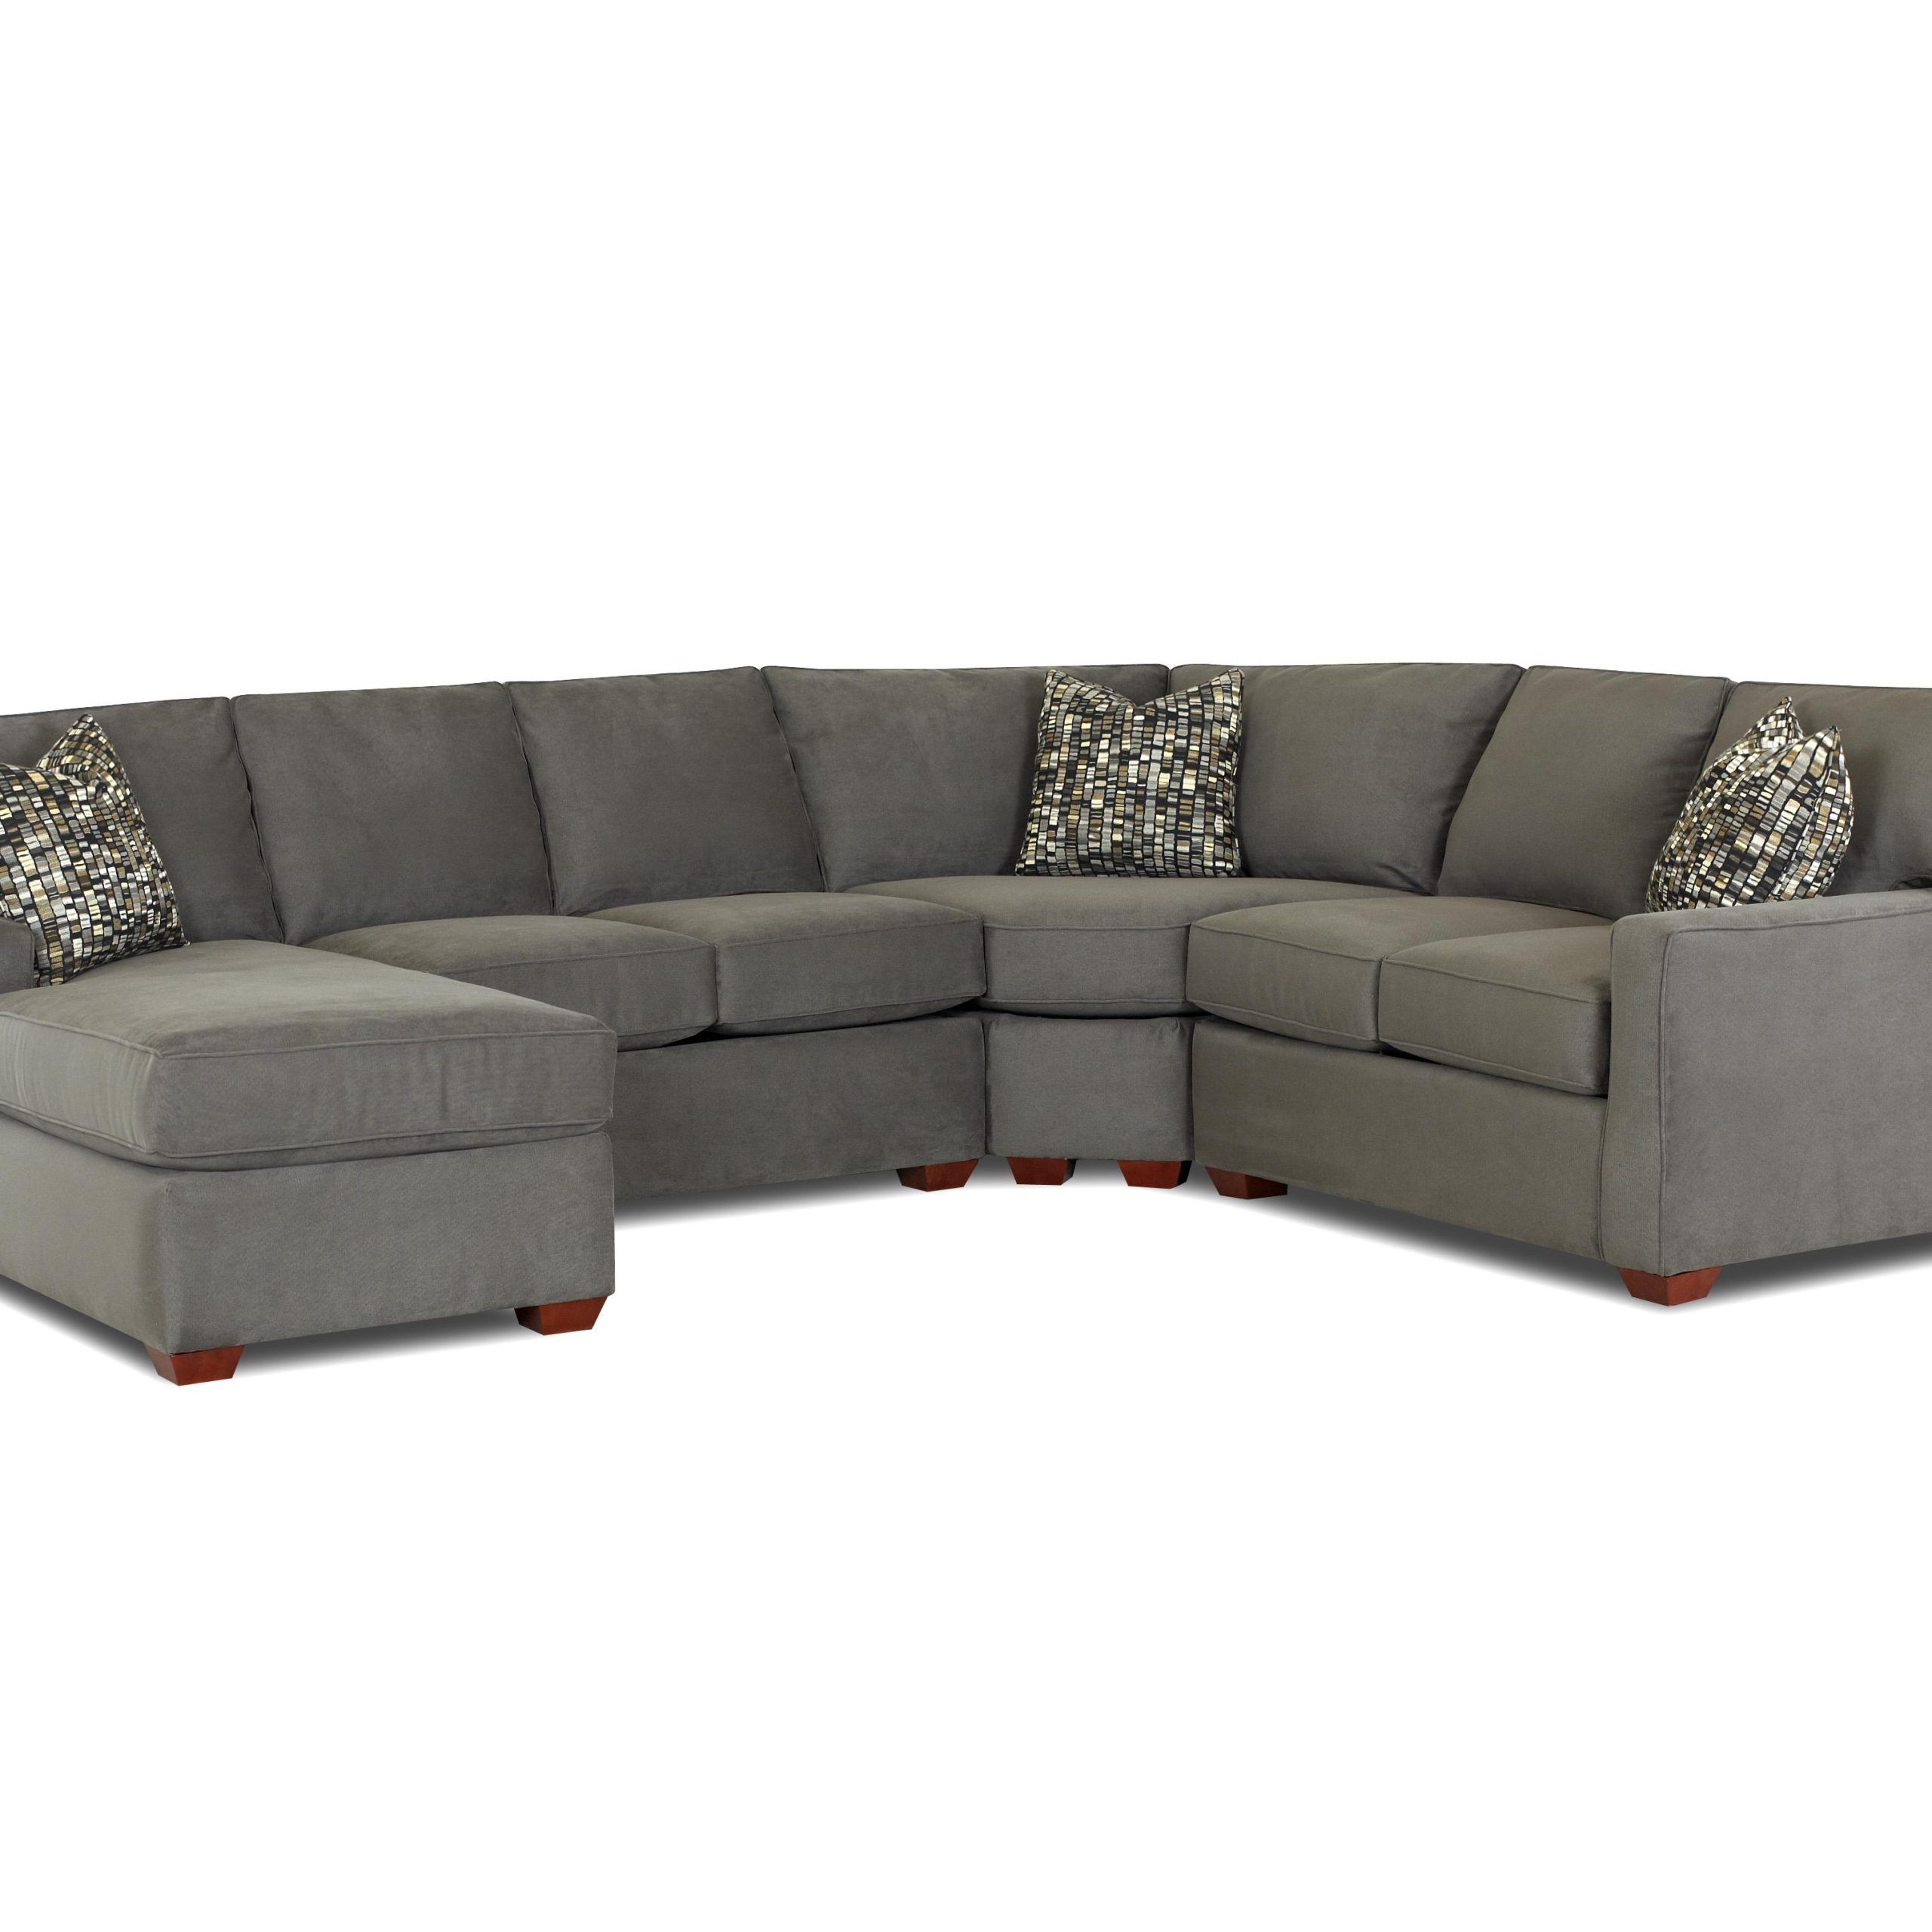 Contemporary L Shaped Sectional Sofa With Right Arm Facing Chaise For Latest Modern L Shaped Sofa Sectionals (View 2 of 15)